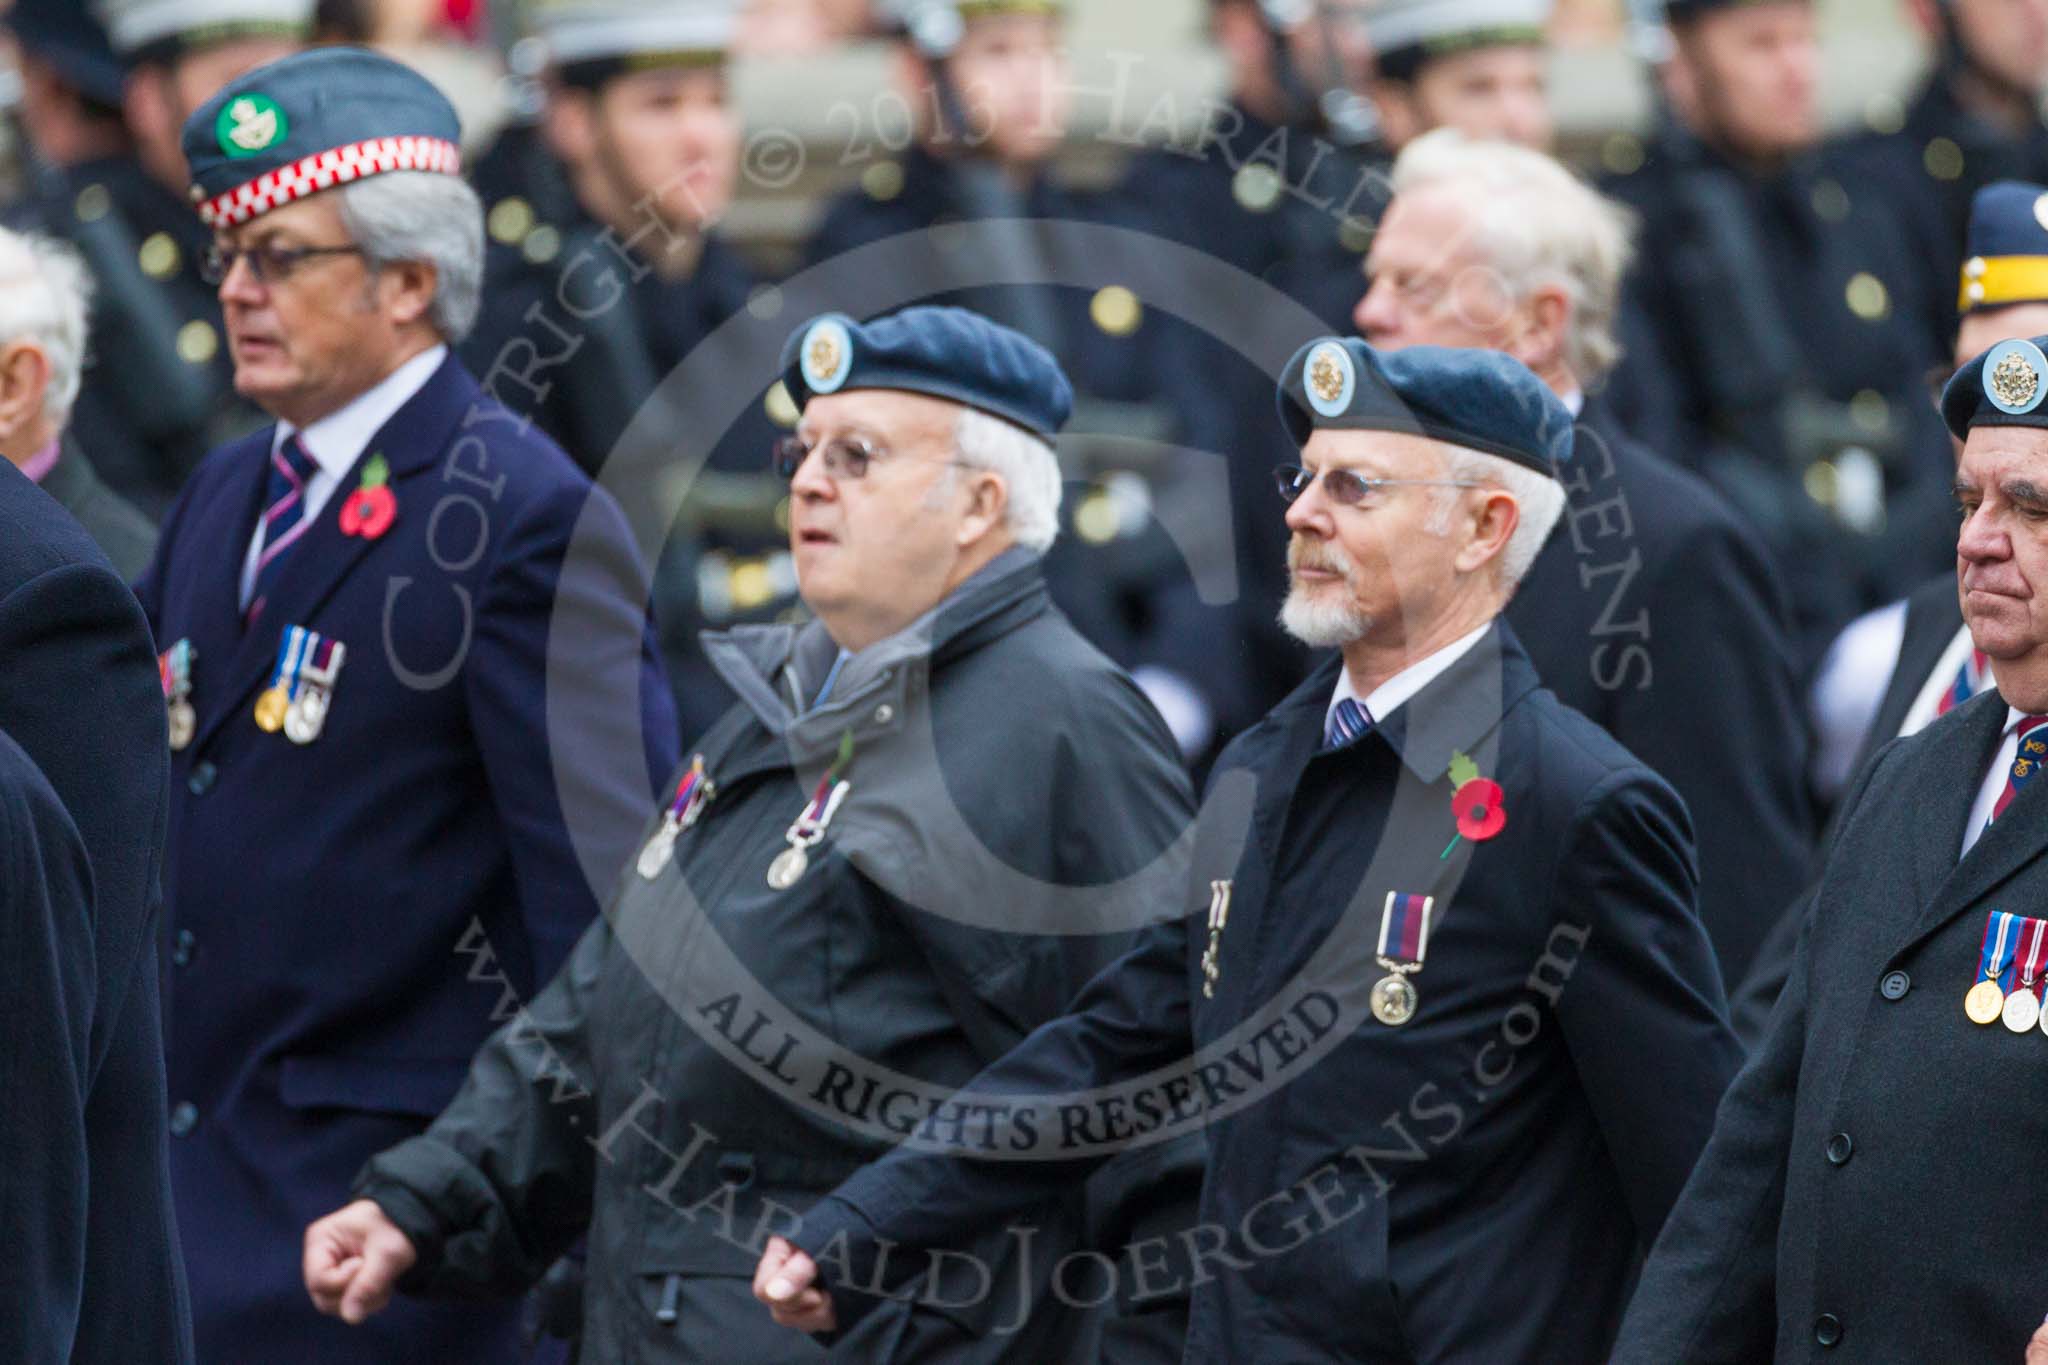 Remembrance Sunday at the Cenotaph 2015: Group C22, Federation of Royal Air Force Apprentice & Boy Entrant Associations.
Cenotaph, Whitehall, London SW1,
London,
Greater London,
United Kingdom,
on 08 November 2015 at 11:50, image #549